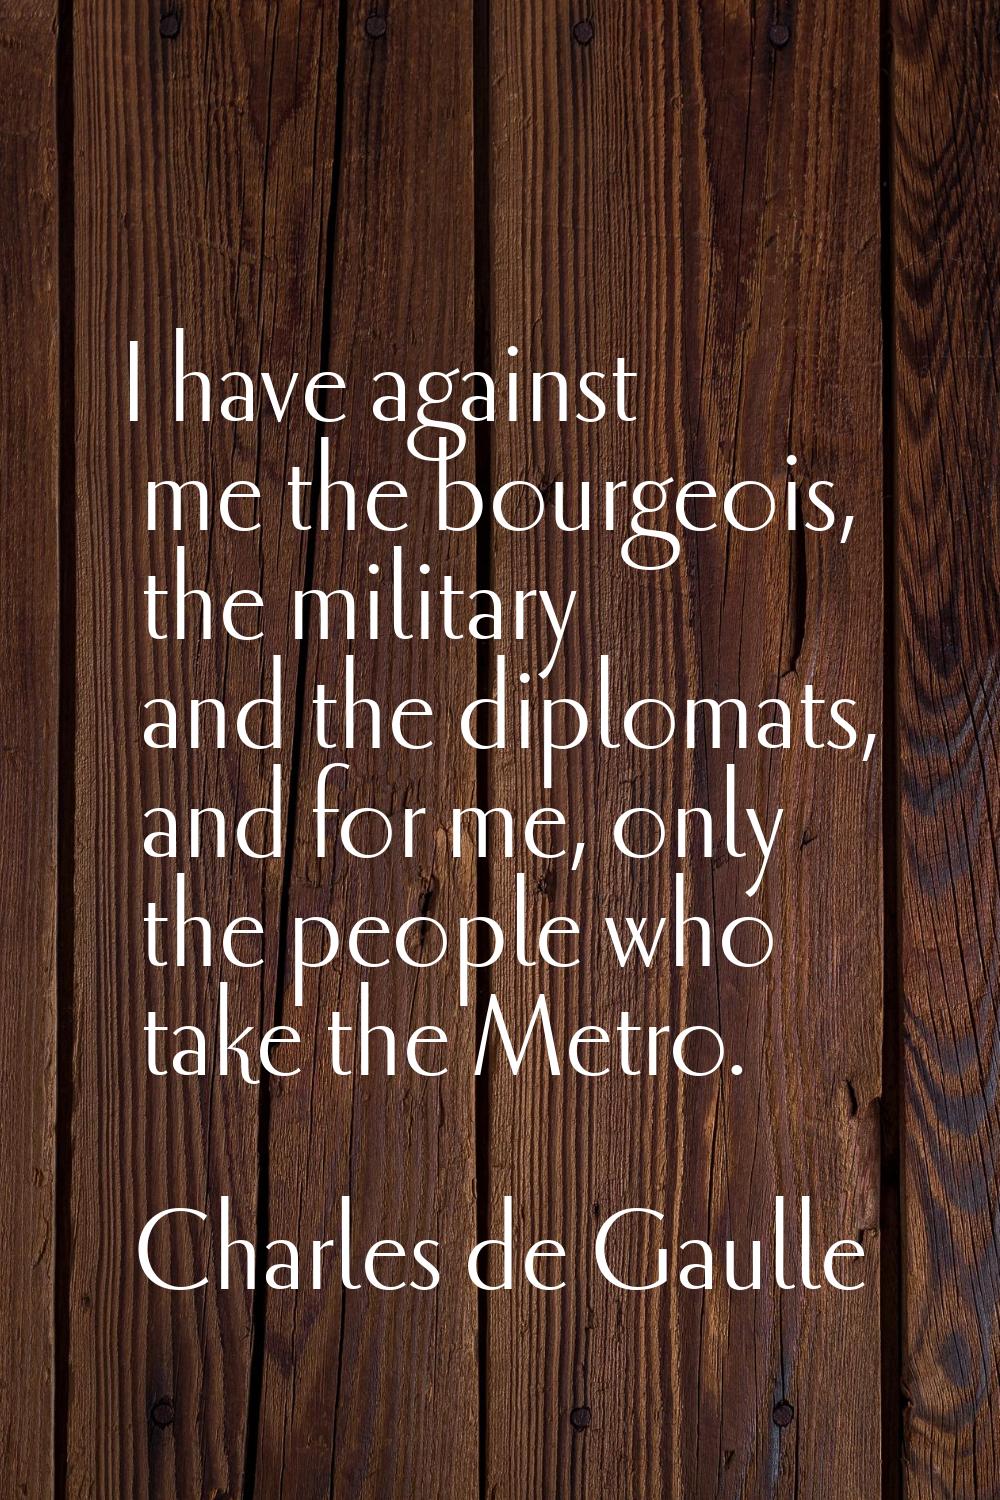 I have against me the bourgeois, the military and the diplomats, and for me, only the people who ta